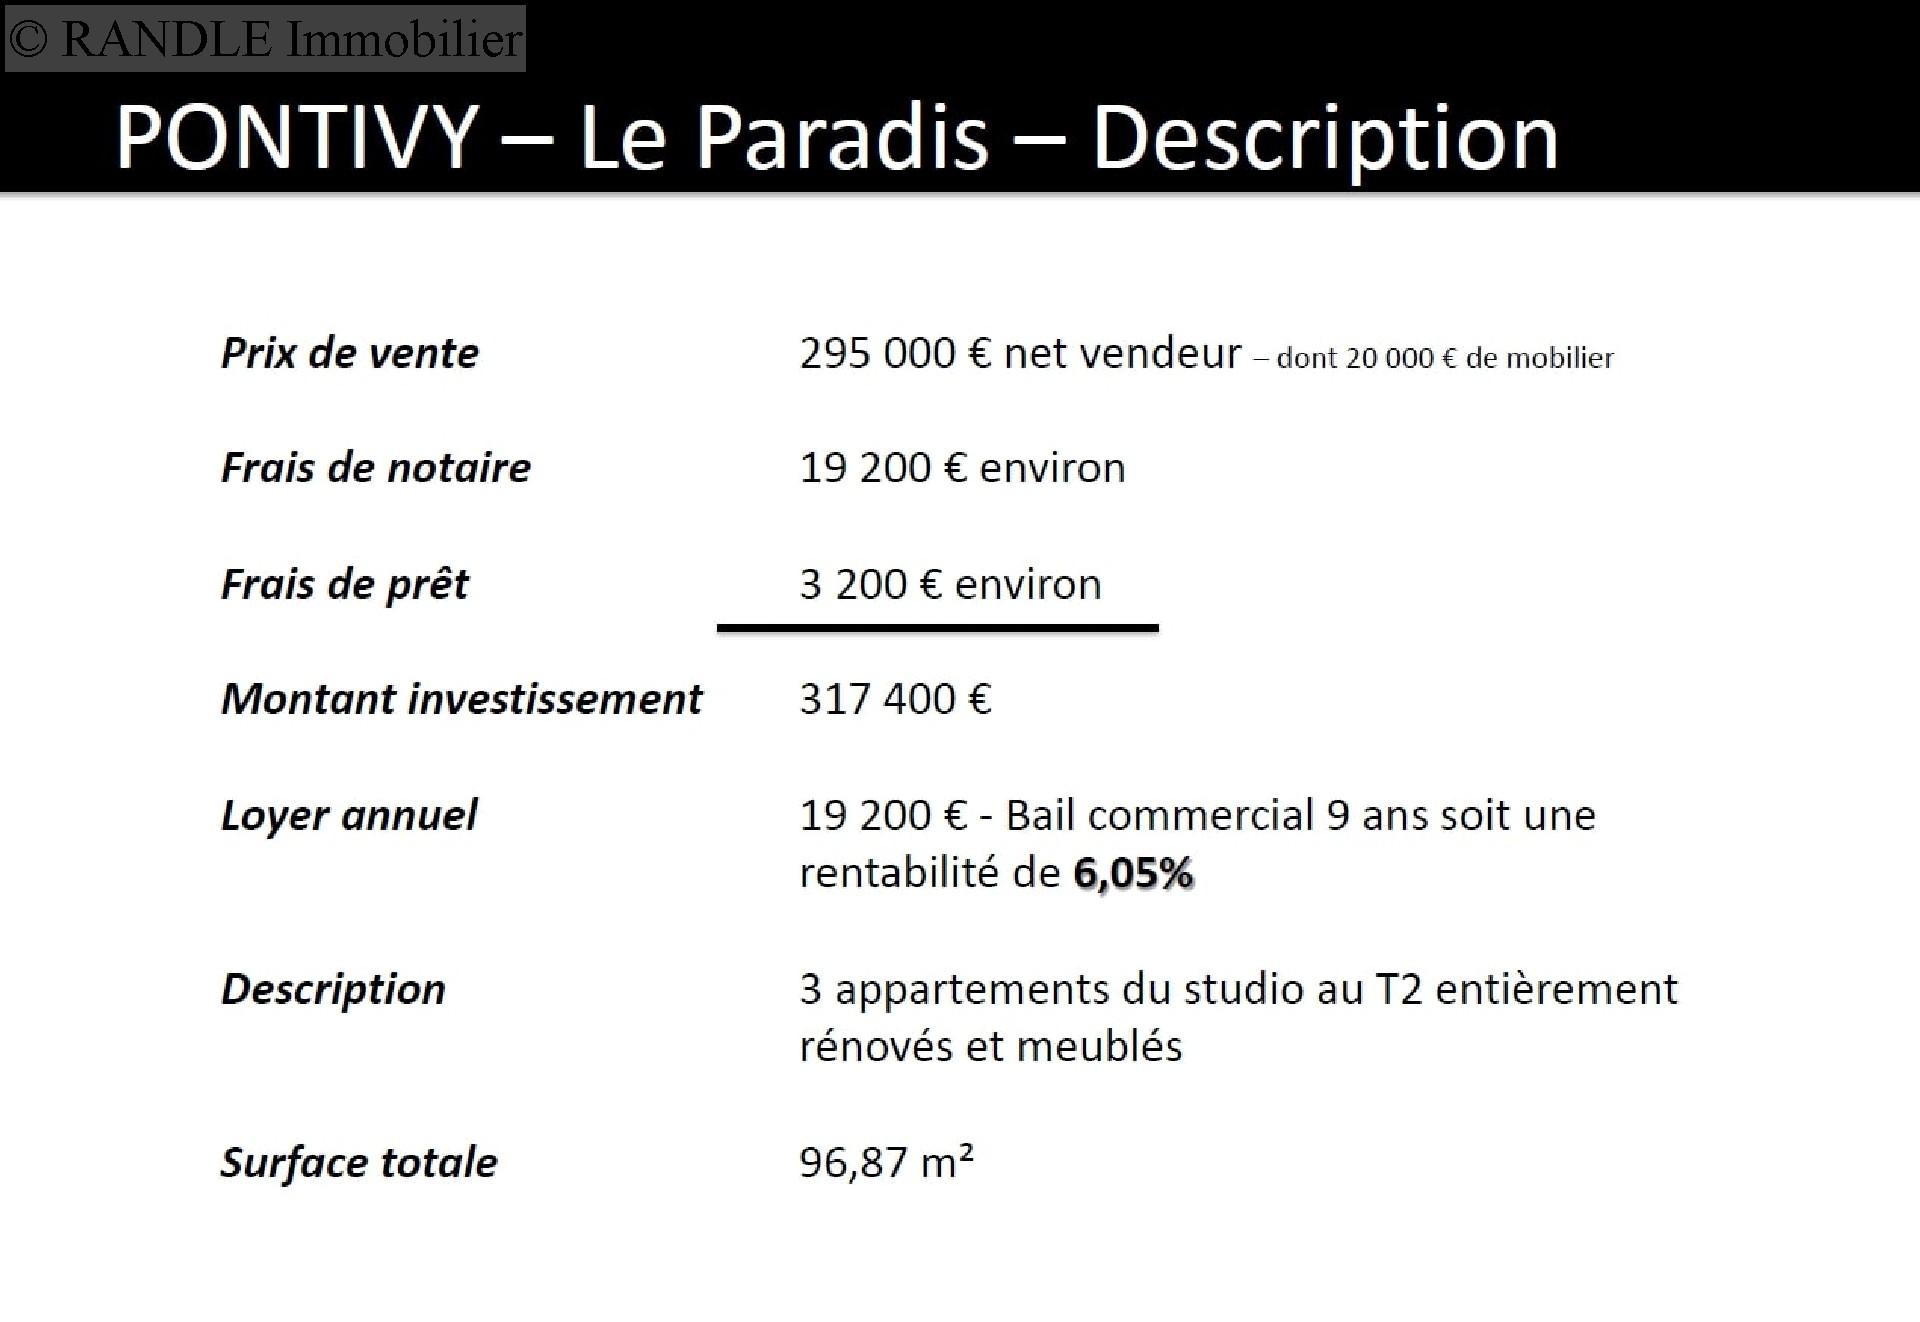 Sell building - PONTIVY 97 m², 6 rooms